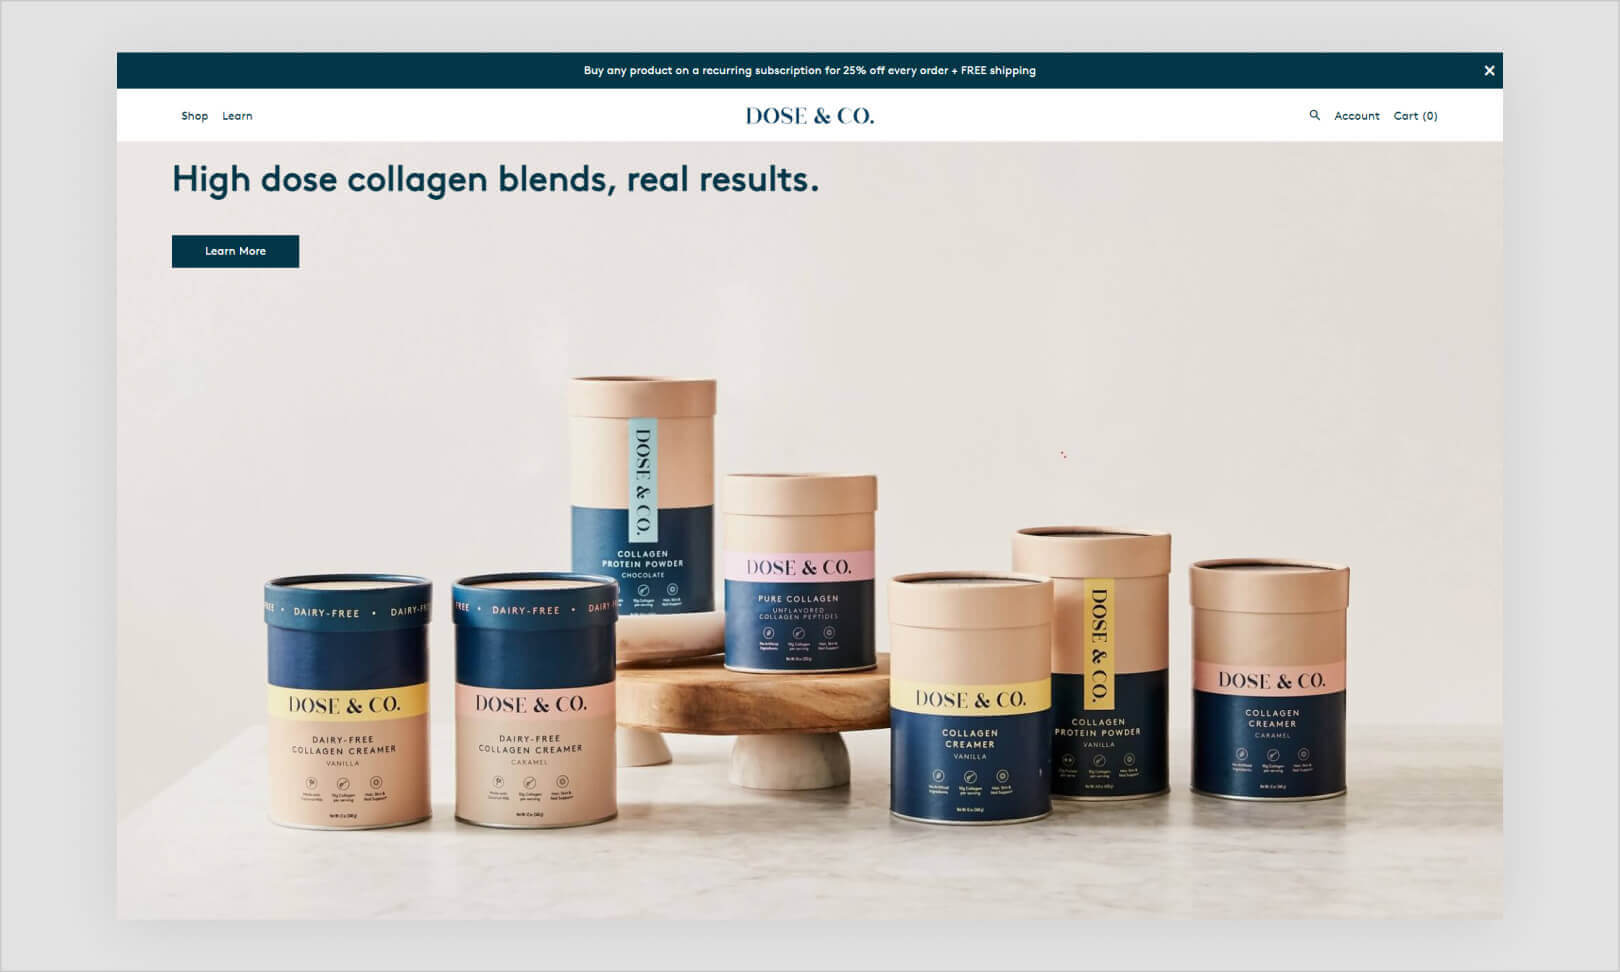 Health and Wellness Shopify store example - Dose & Co.